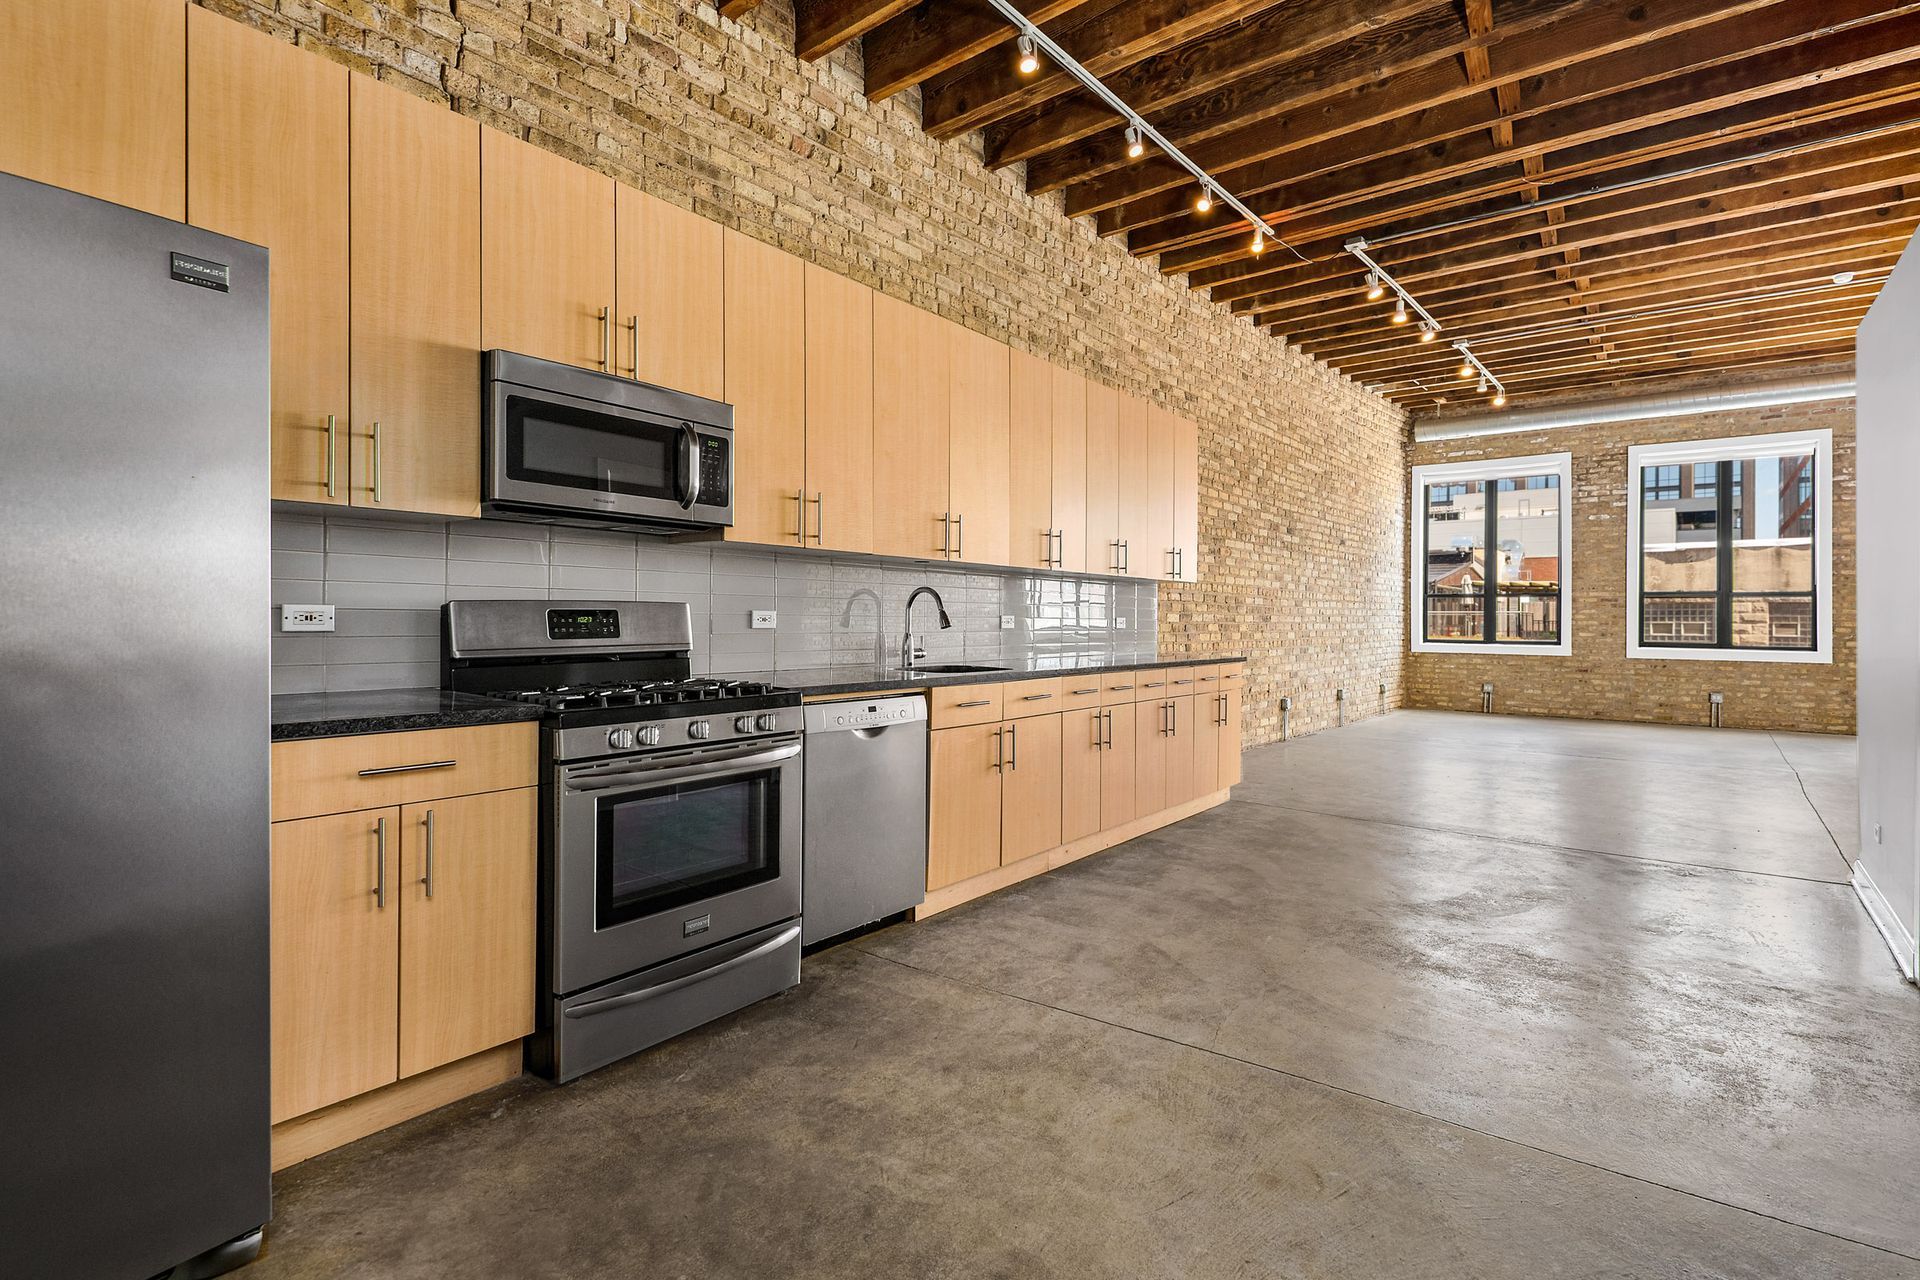 A kitchen with stainless steel appliances and wooden cabinets at 945 W Fulton Market Apartments.